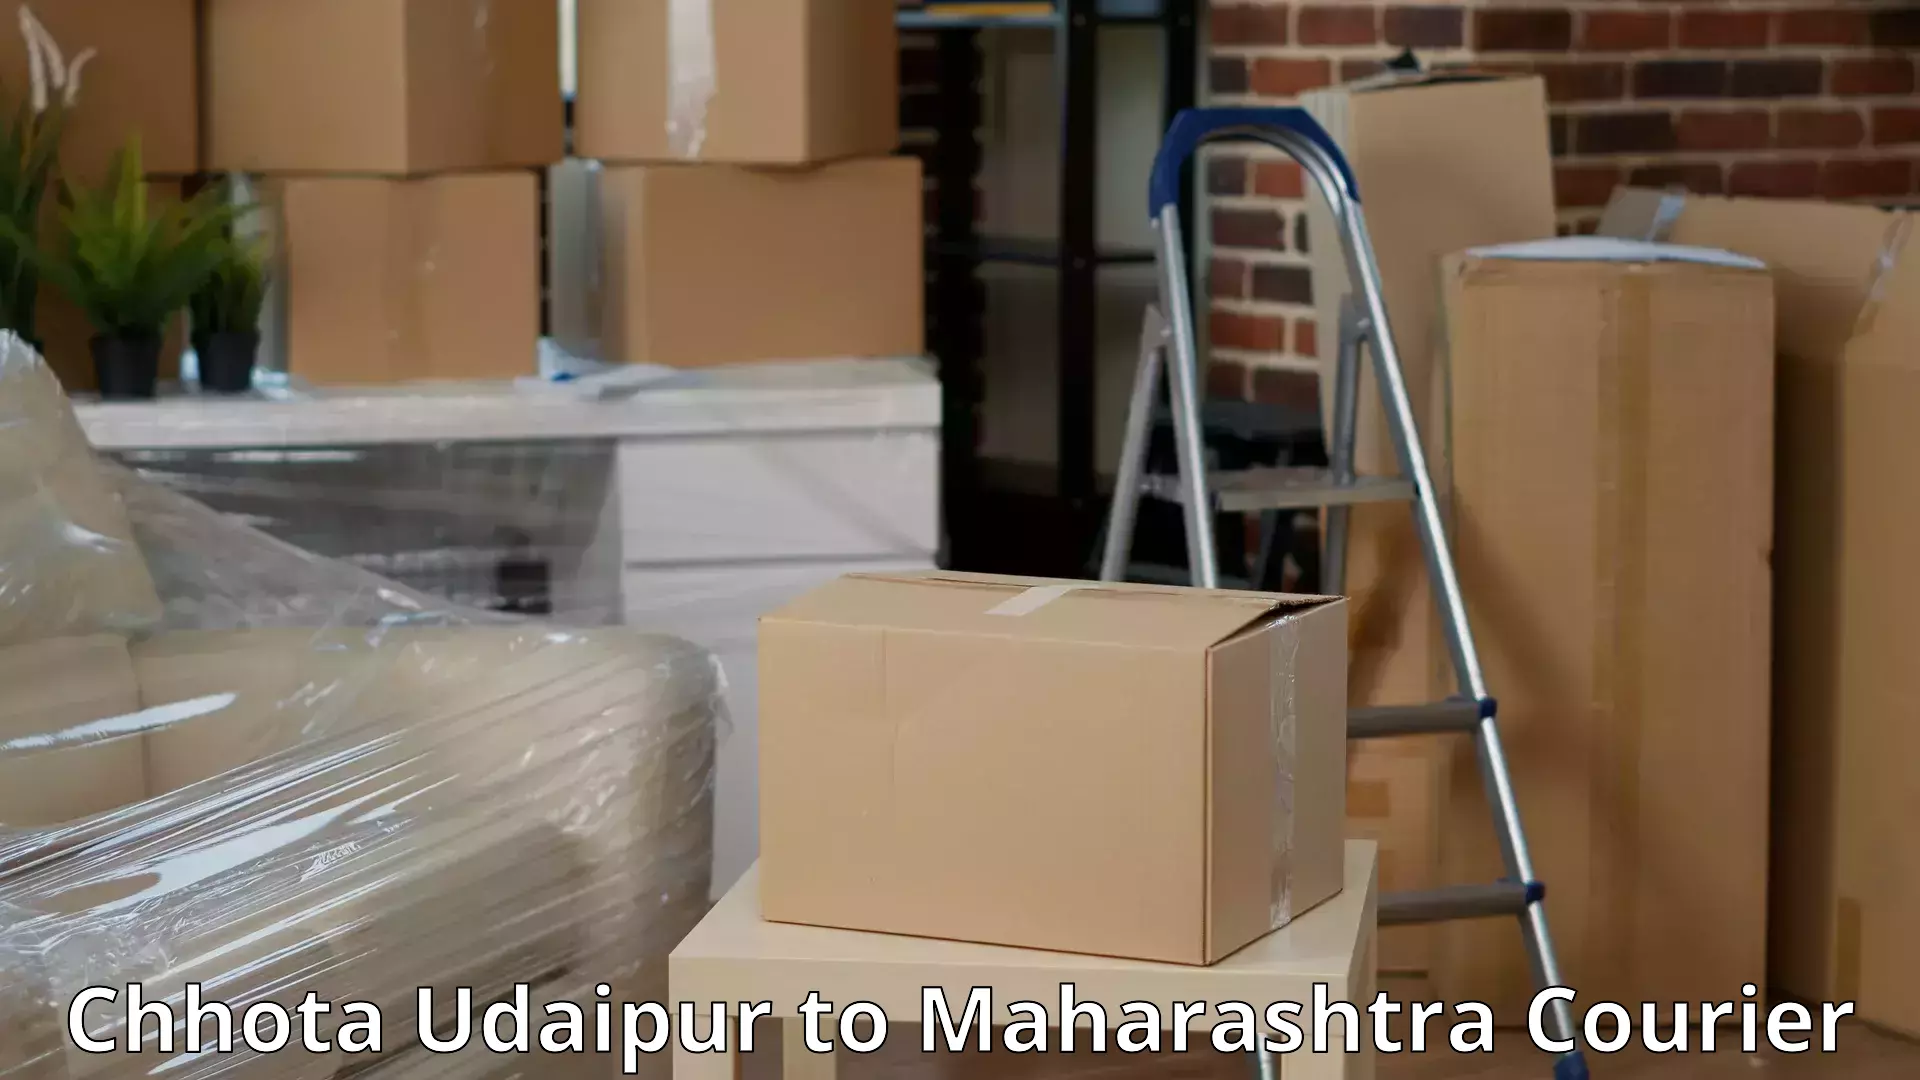 Seamless moving process Chhota Udaipur to Beed